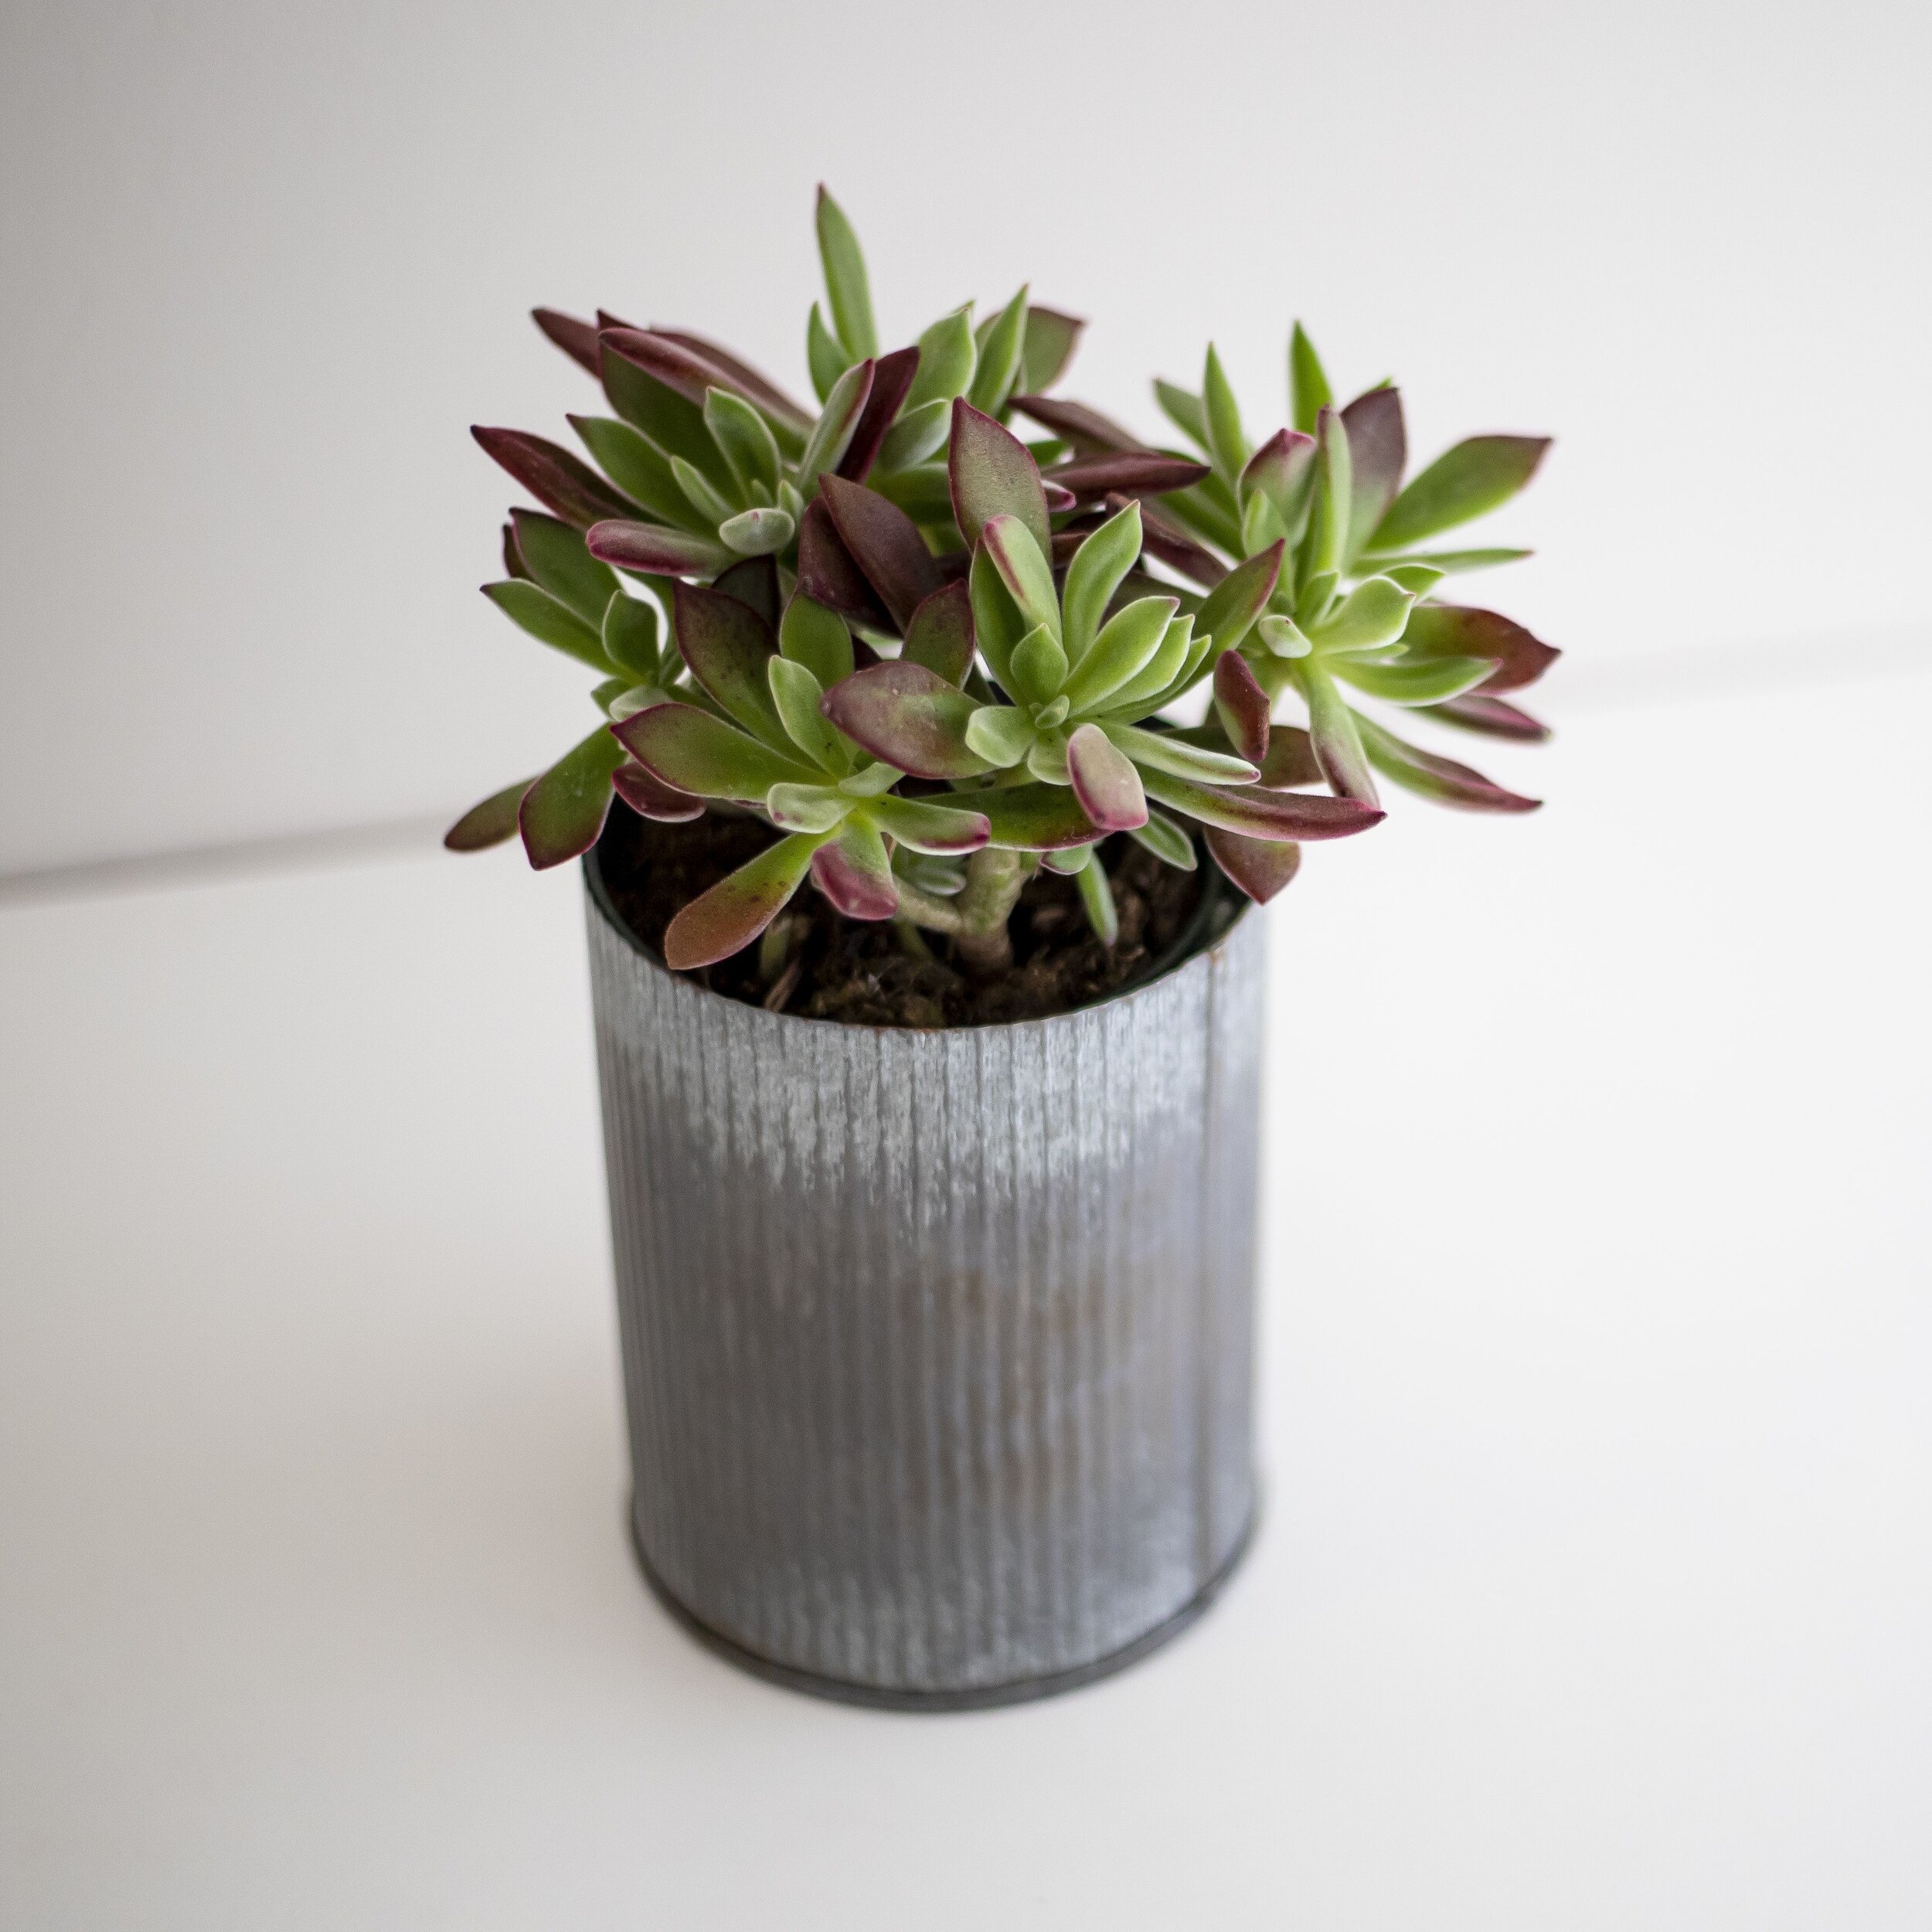 An Echeveria plant in a gray metal pot sitting on a white flat surface